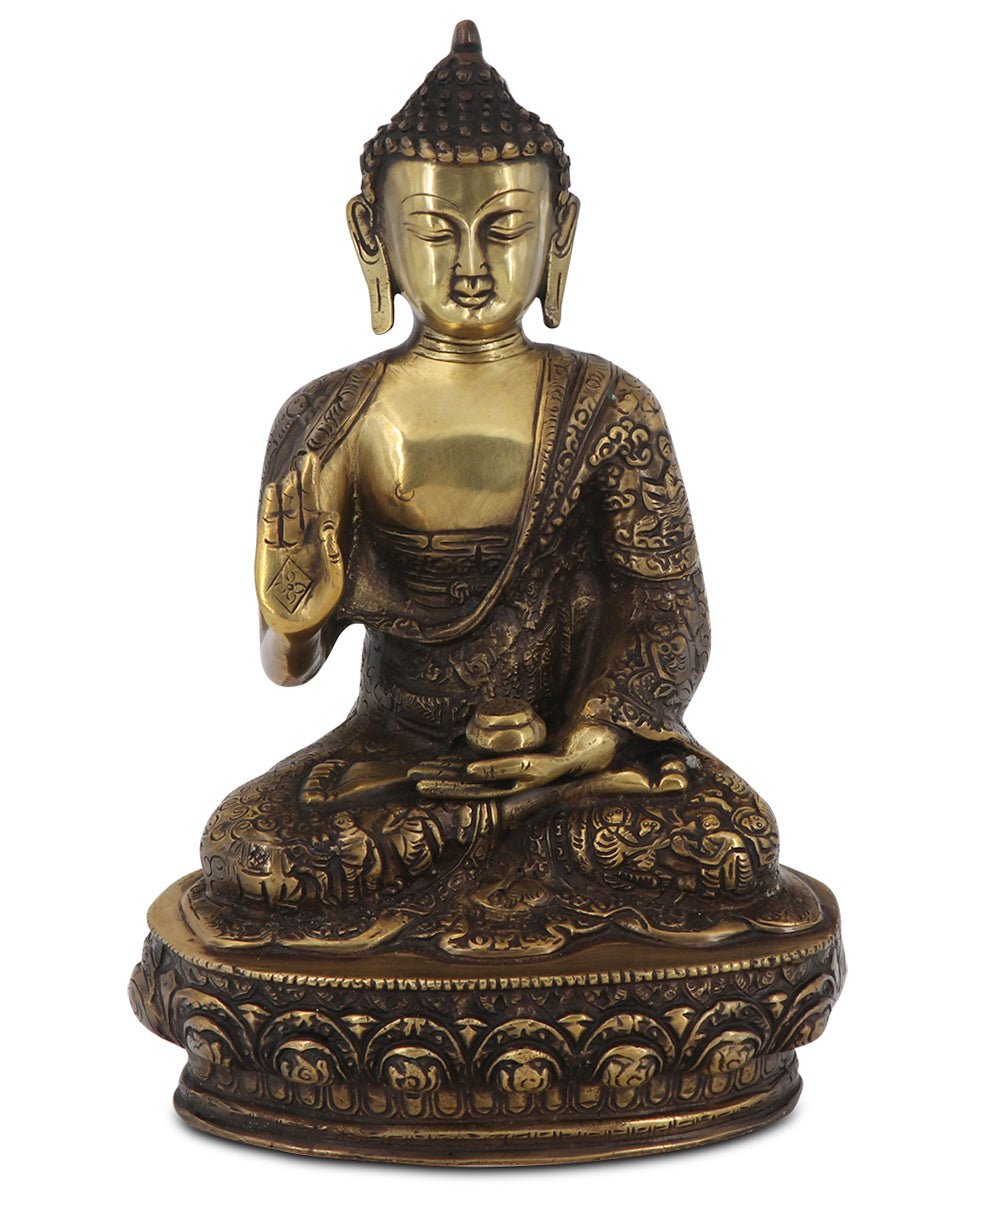 Intricate Life of Buddha Brass Statue, 12 Inches High - Sculptures & Statues